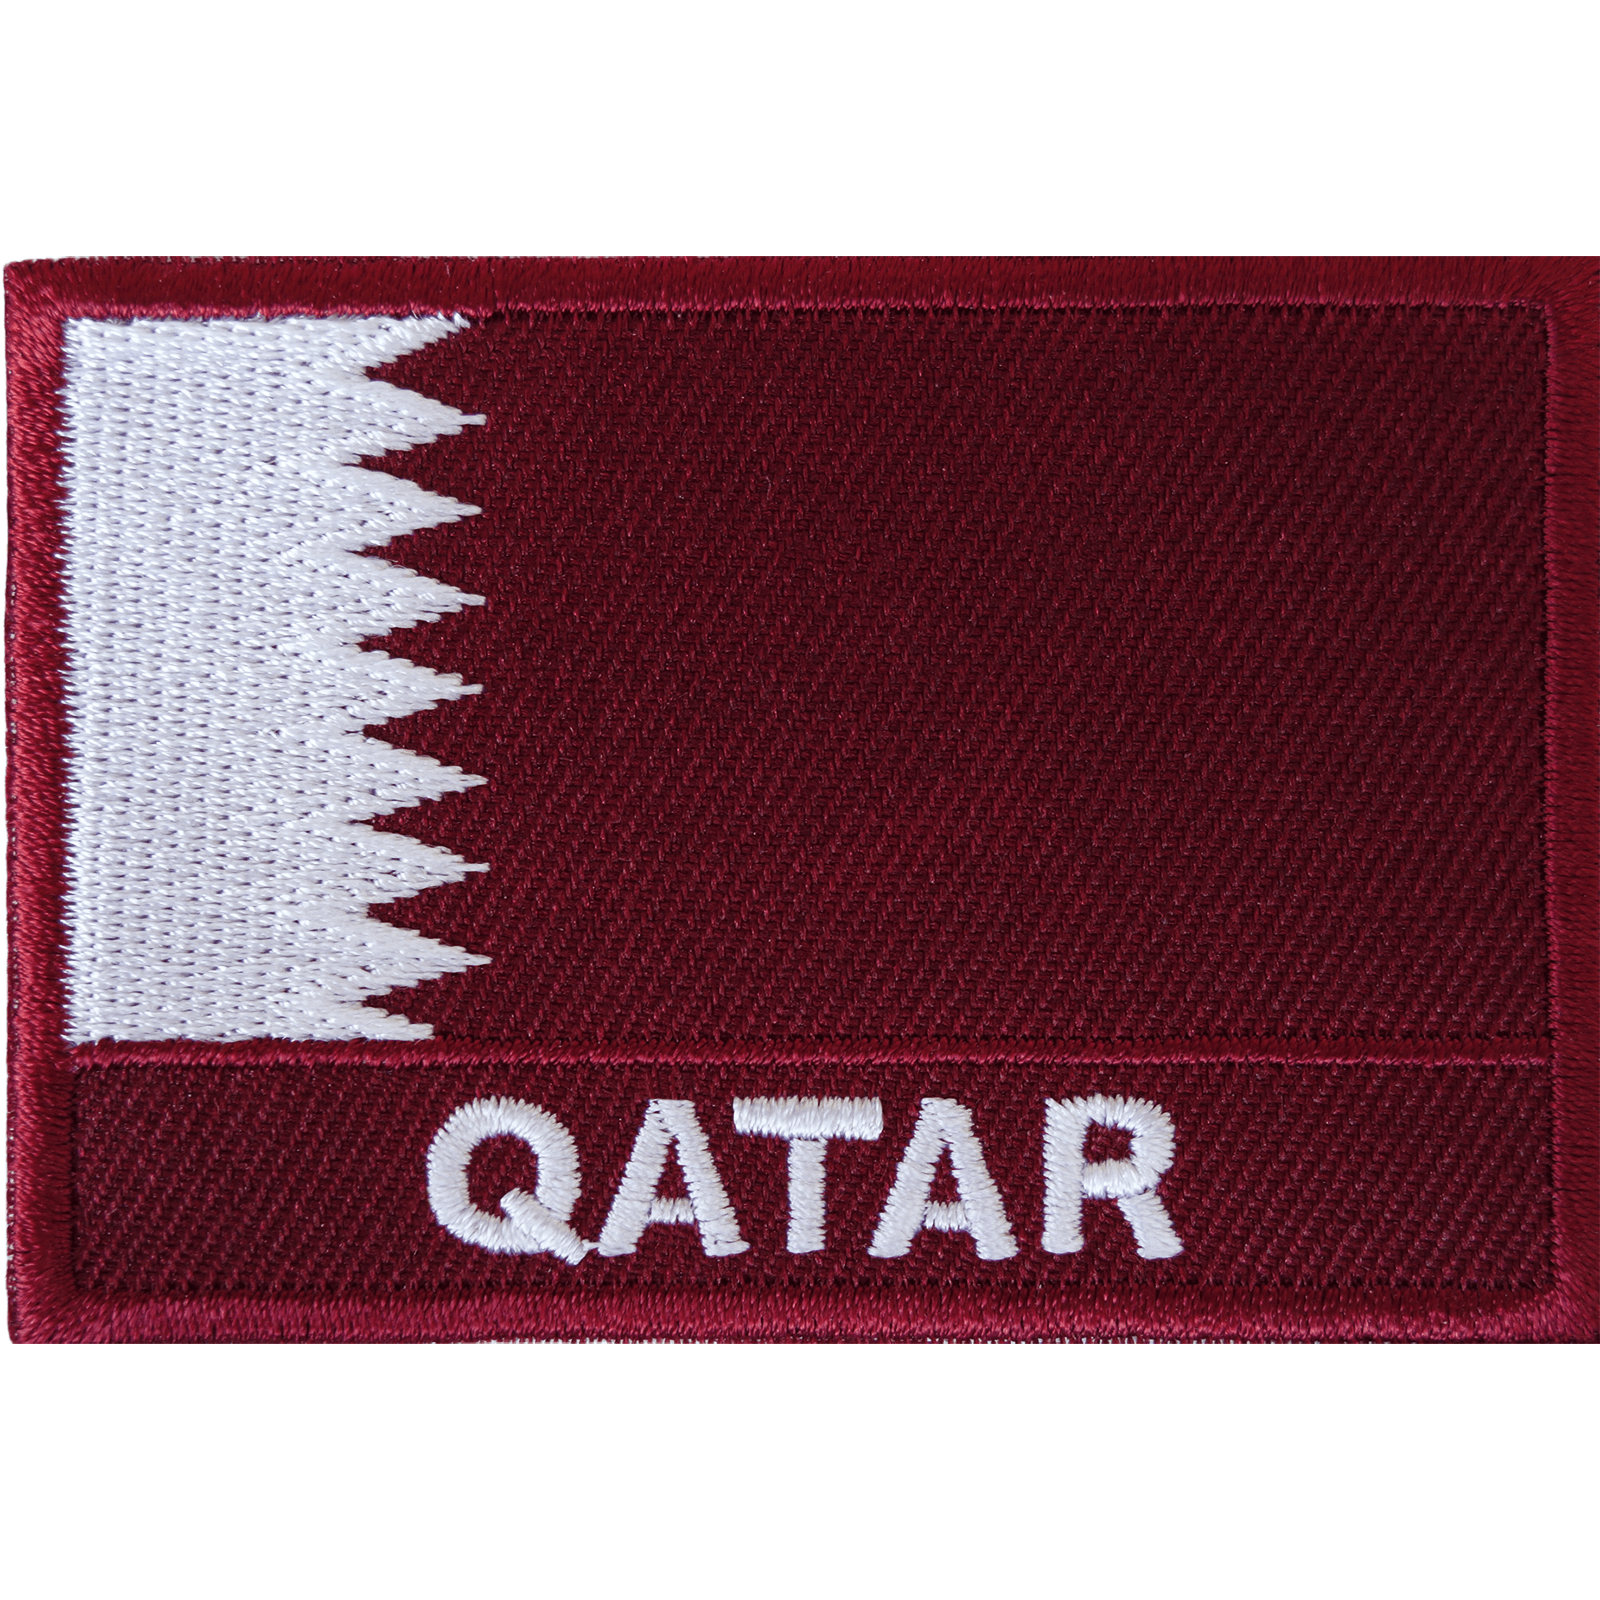 Qatar Flag Iron On Patch Sew On Clothes Middle East Doha Arab Embroidered Badge